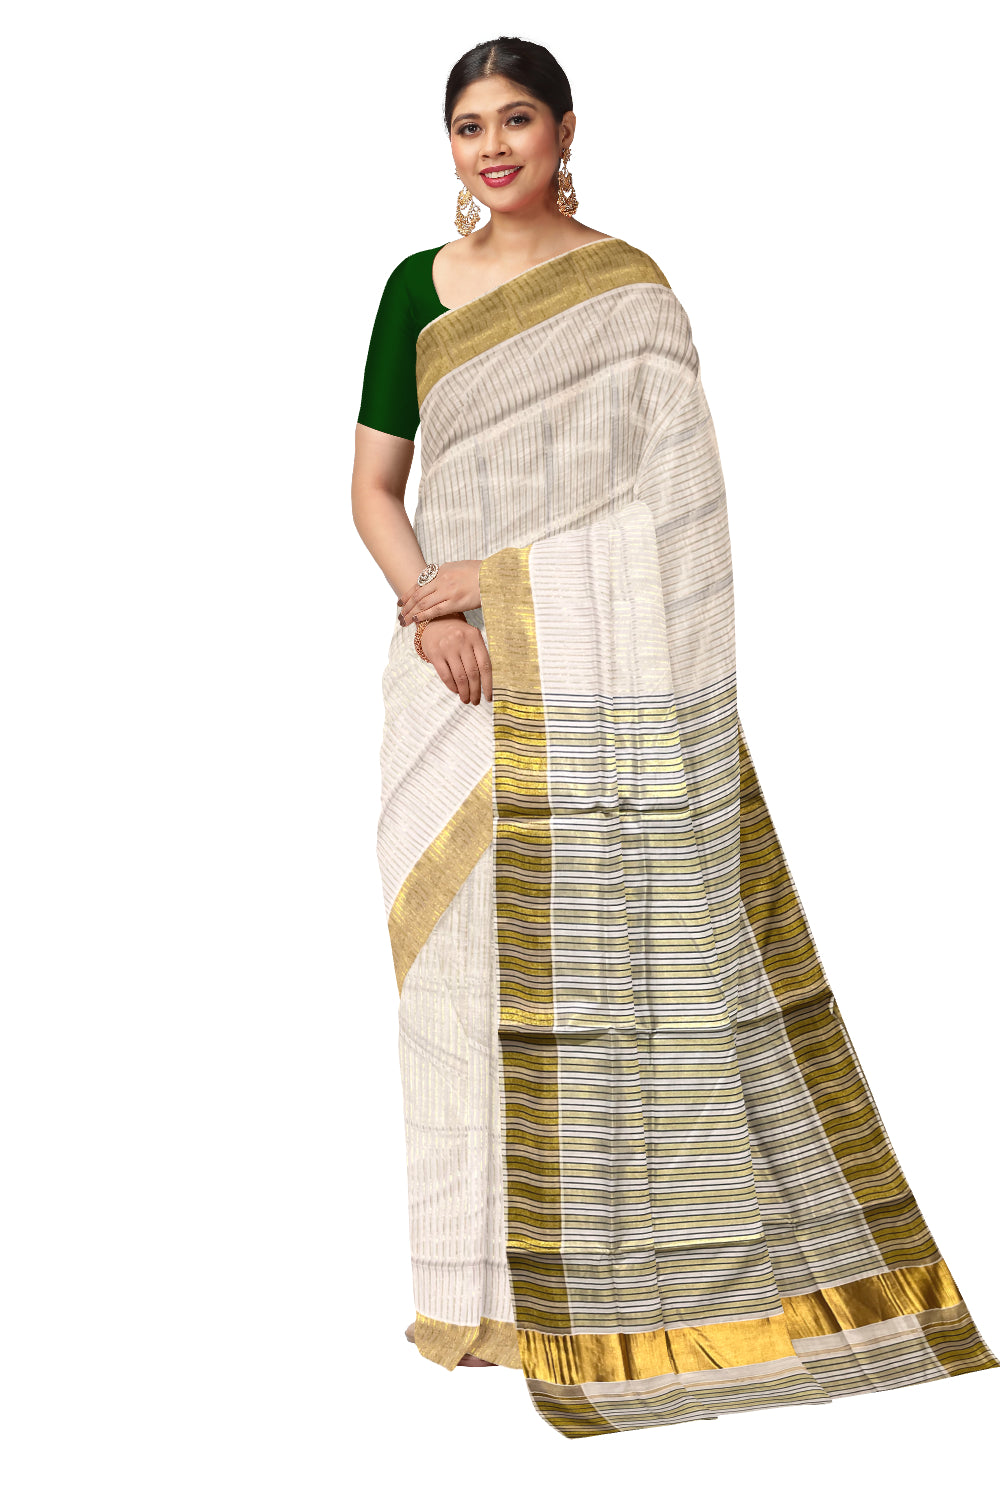 Pure Cotton Kerala Kasavu Saree with Lines Designs on Body and Dark Green Lines on Munthani